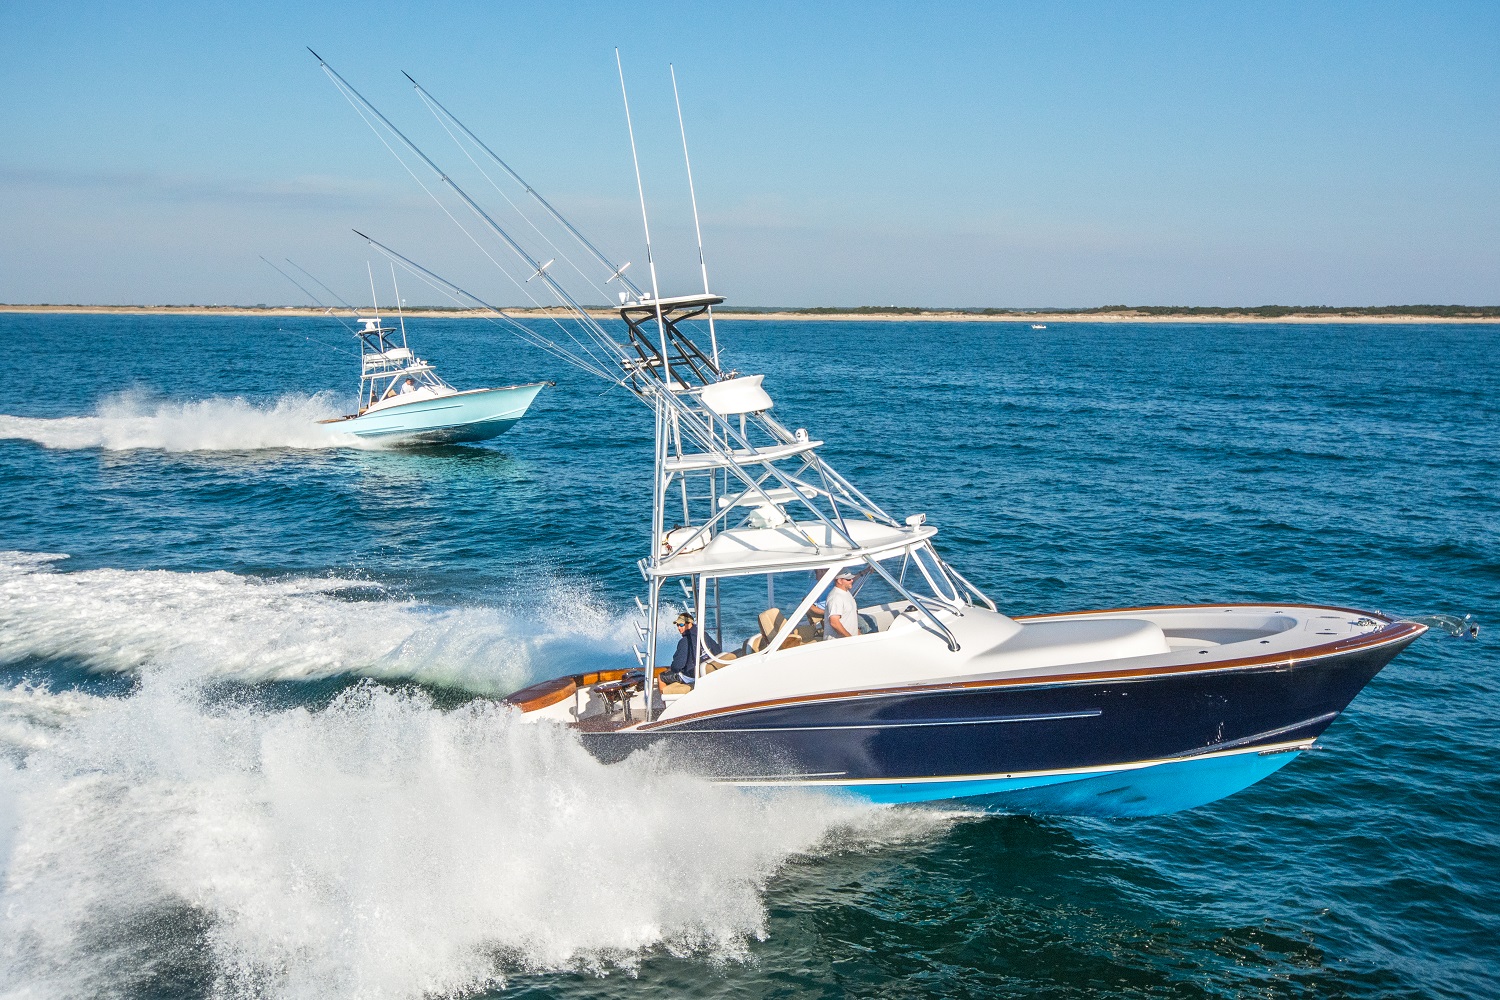 Big Rock Blue Marlin Tournament A Fishing Experience Like No Other